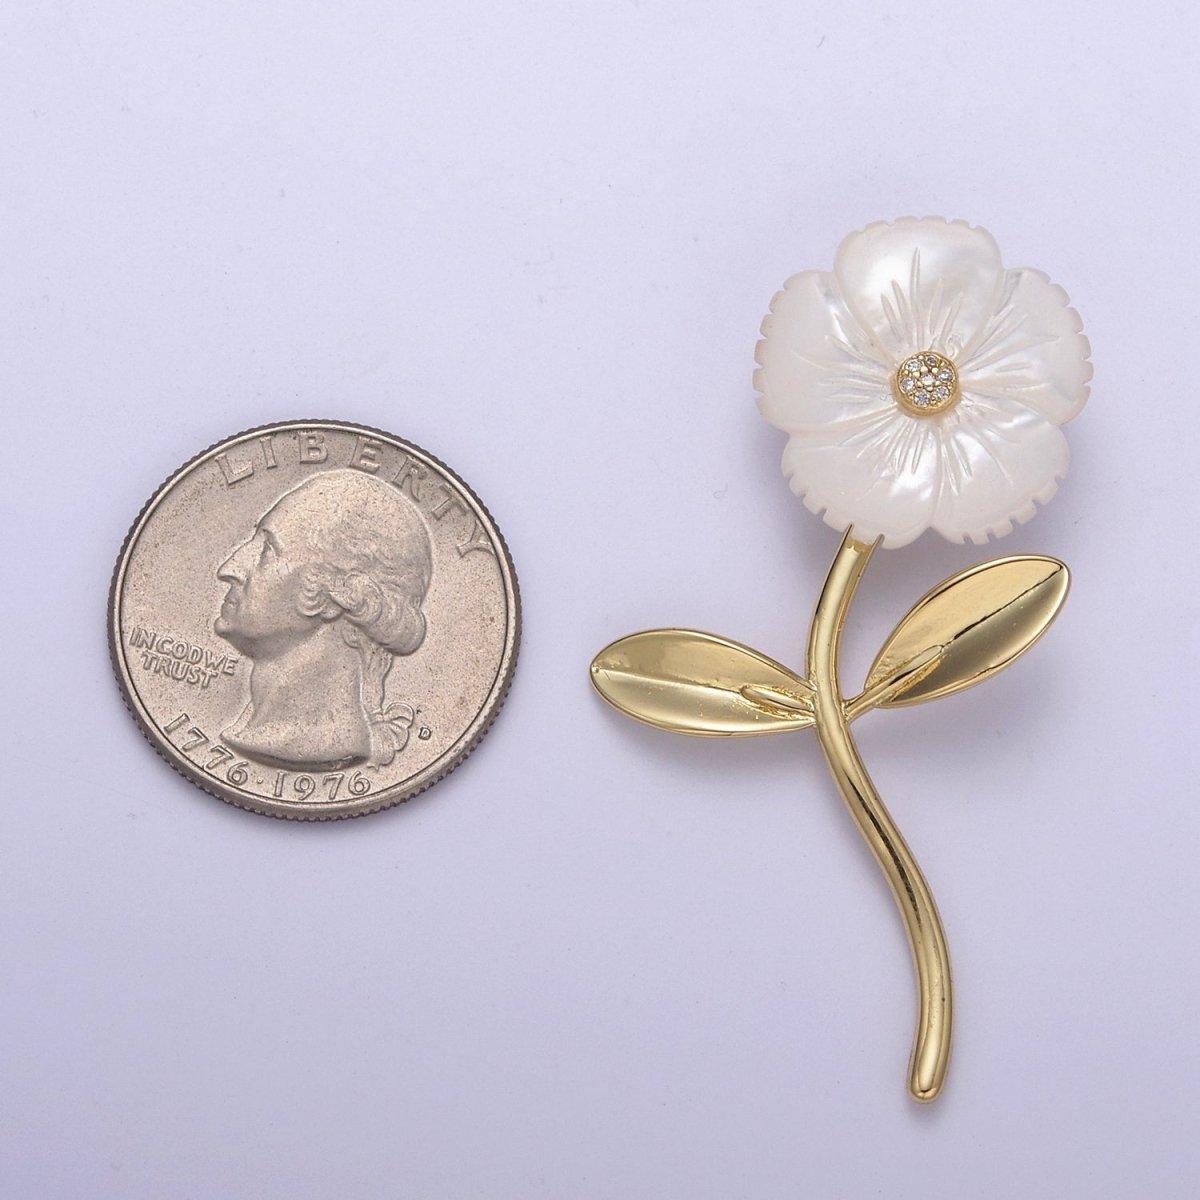 Dangle Carved White Pearl flower Poppy Charm / Daisy pendant for Necklace Charm Minimalist Jewelry H-061 H-067 - DLUXCA